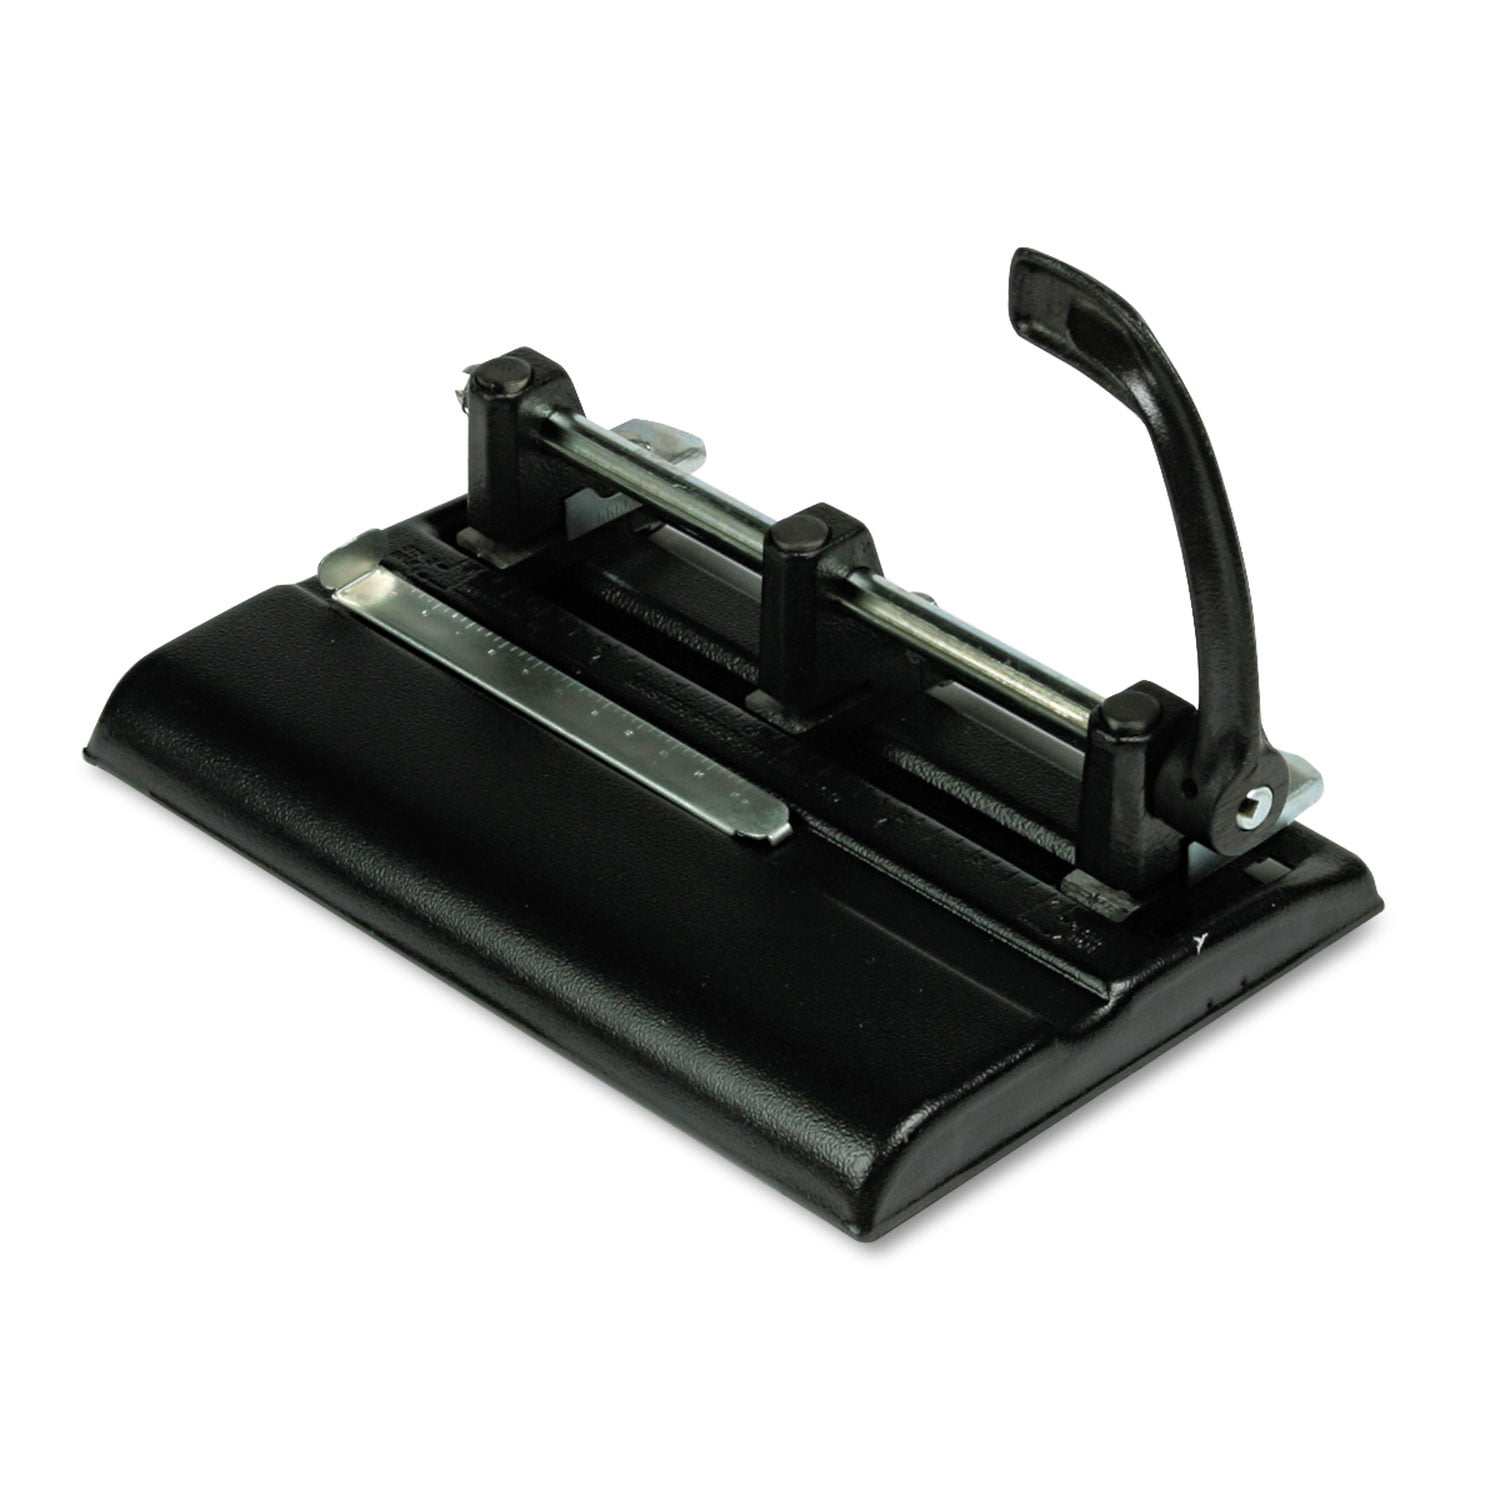 Acura 3 Hole Heavy Duty Puncher - Biggest Online Office Supplies Store